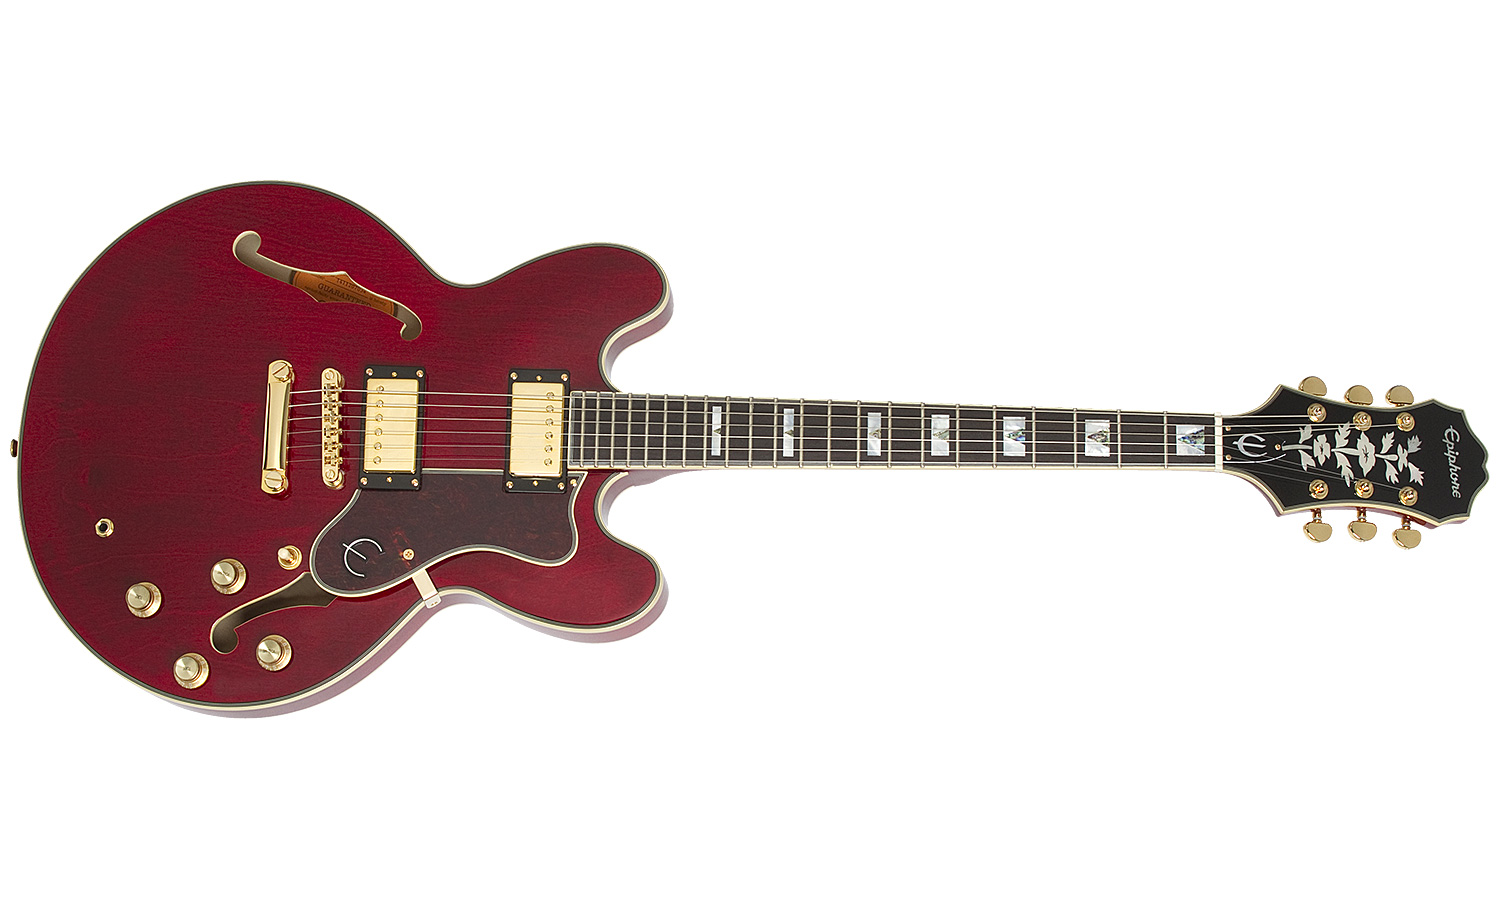 Epiphone Sheraton Ii Pro 2018 Hh Ht Pf - Wine Red - Semi-hollow electric guitar - Variation 1